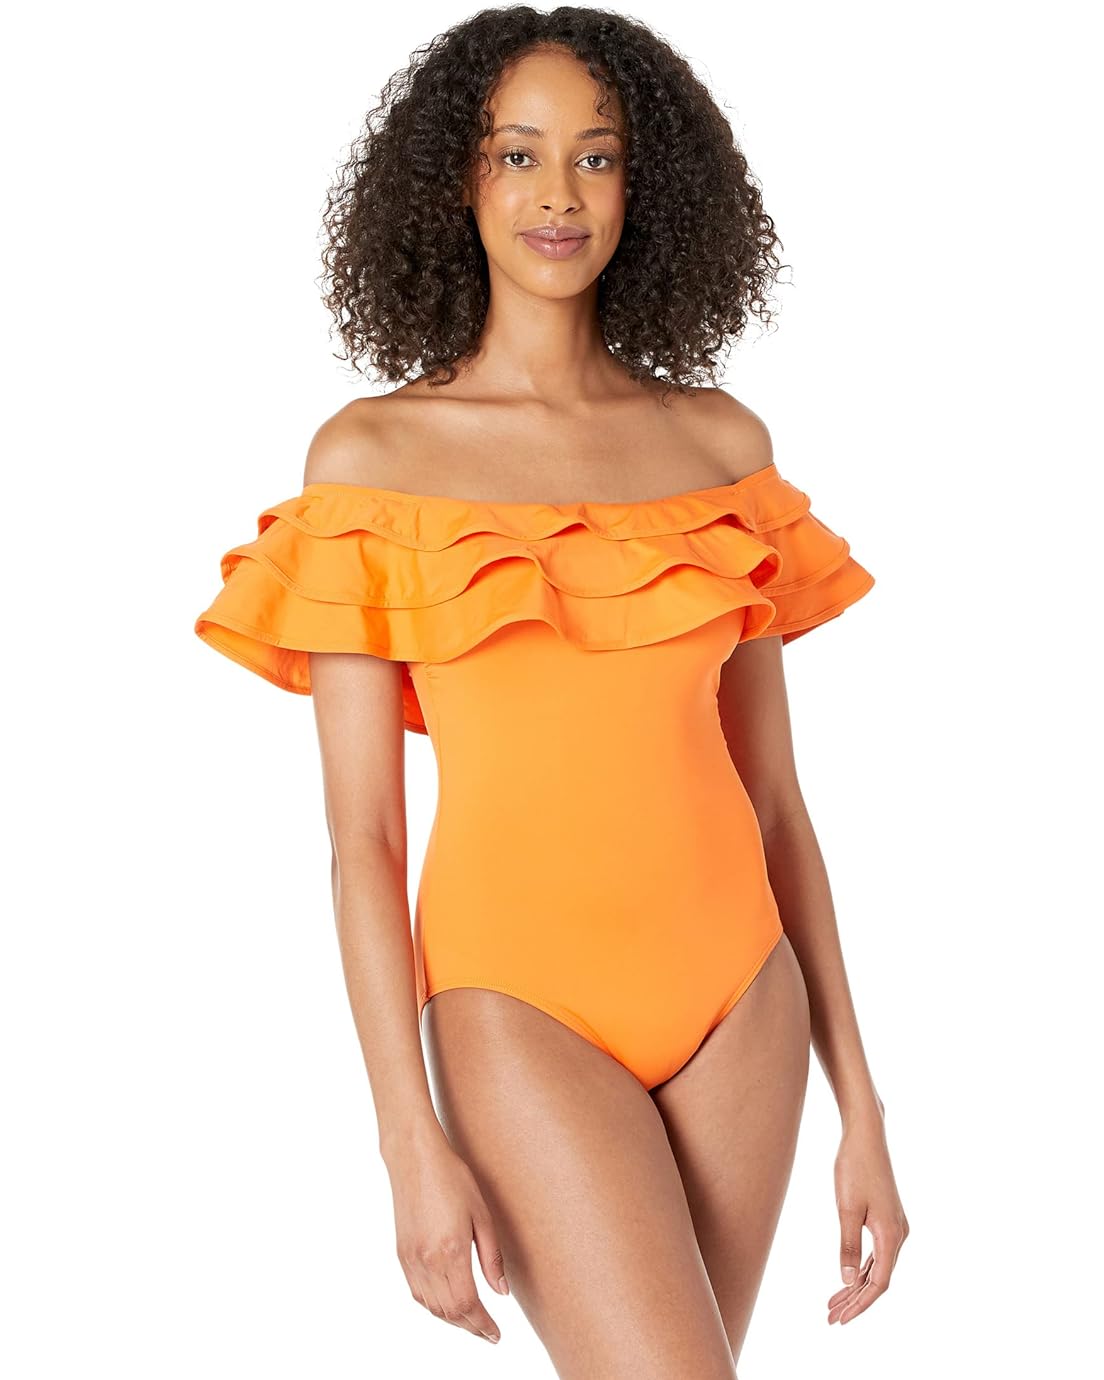 Kate Spade New York Palm Beach Ruffle Off-the-Shoulder One-Piece wu002F Removable Soft Cups